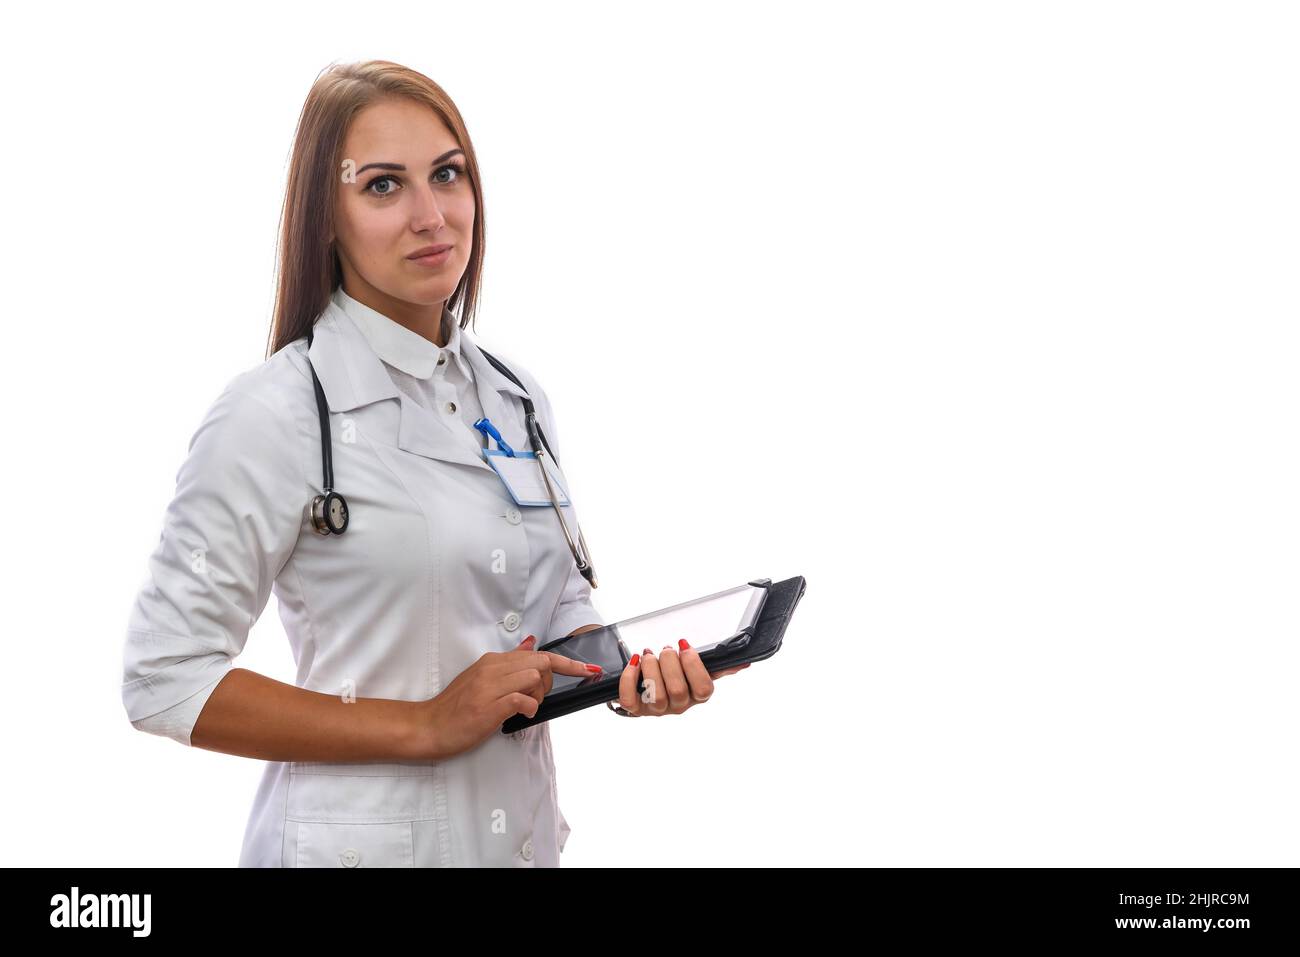 Tablet and medicine. Beautiful woman doctor holding tablet isolated on white. Using of modern devices in medical work Stock Photo